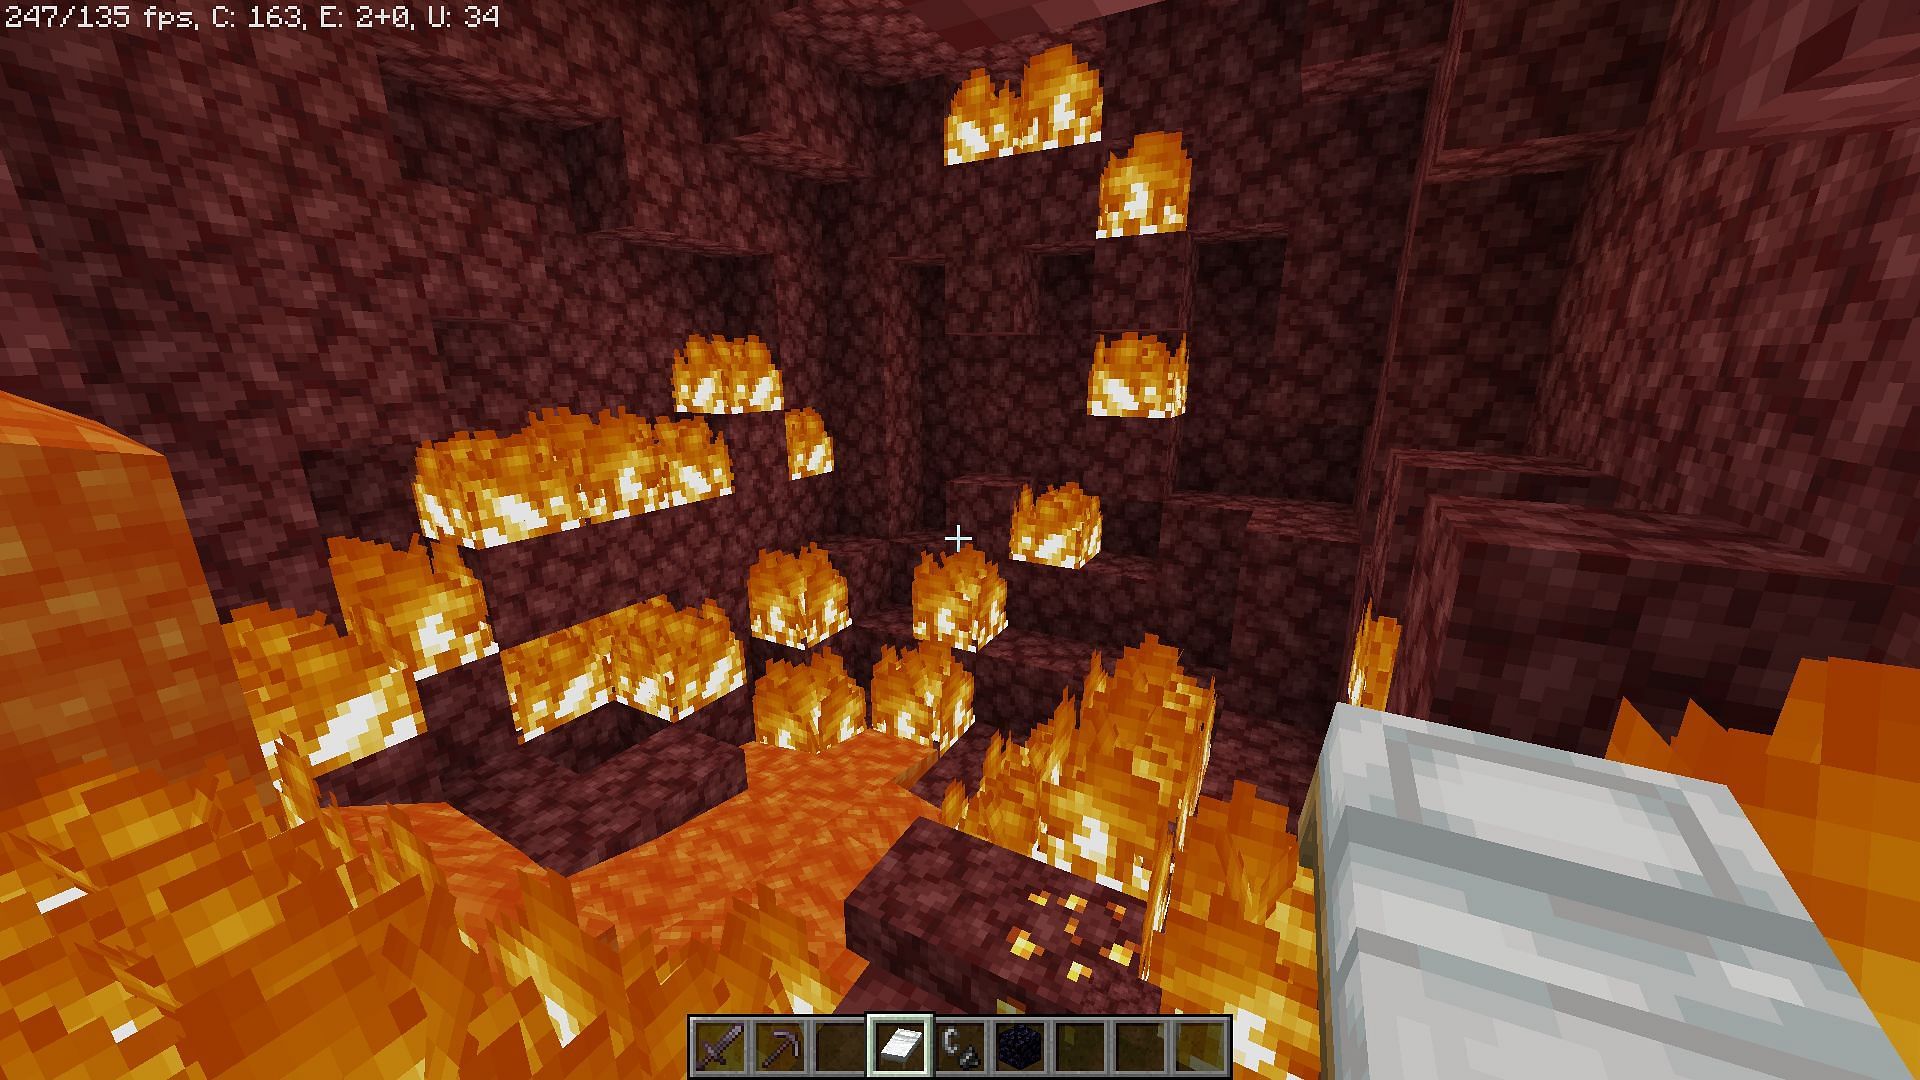 Explosions and lava pockets can burn players in Minecraft, hence Fire Resistance potion can be a lifesaver (Image via Mojang)